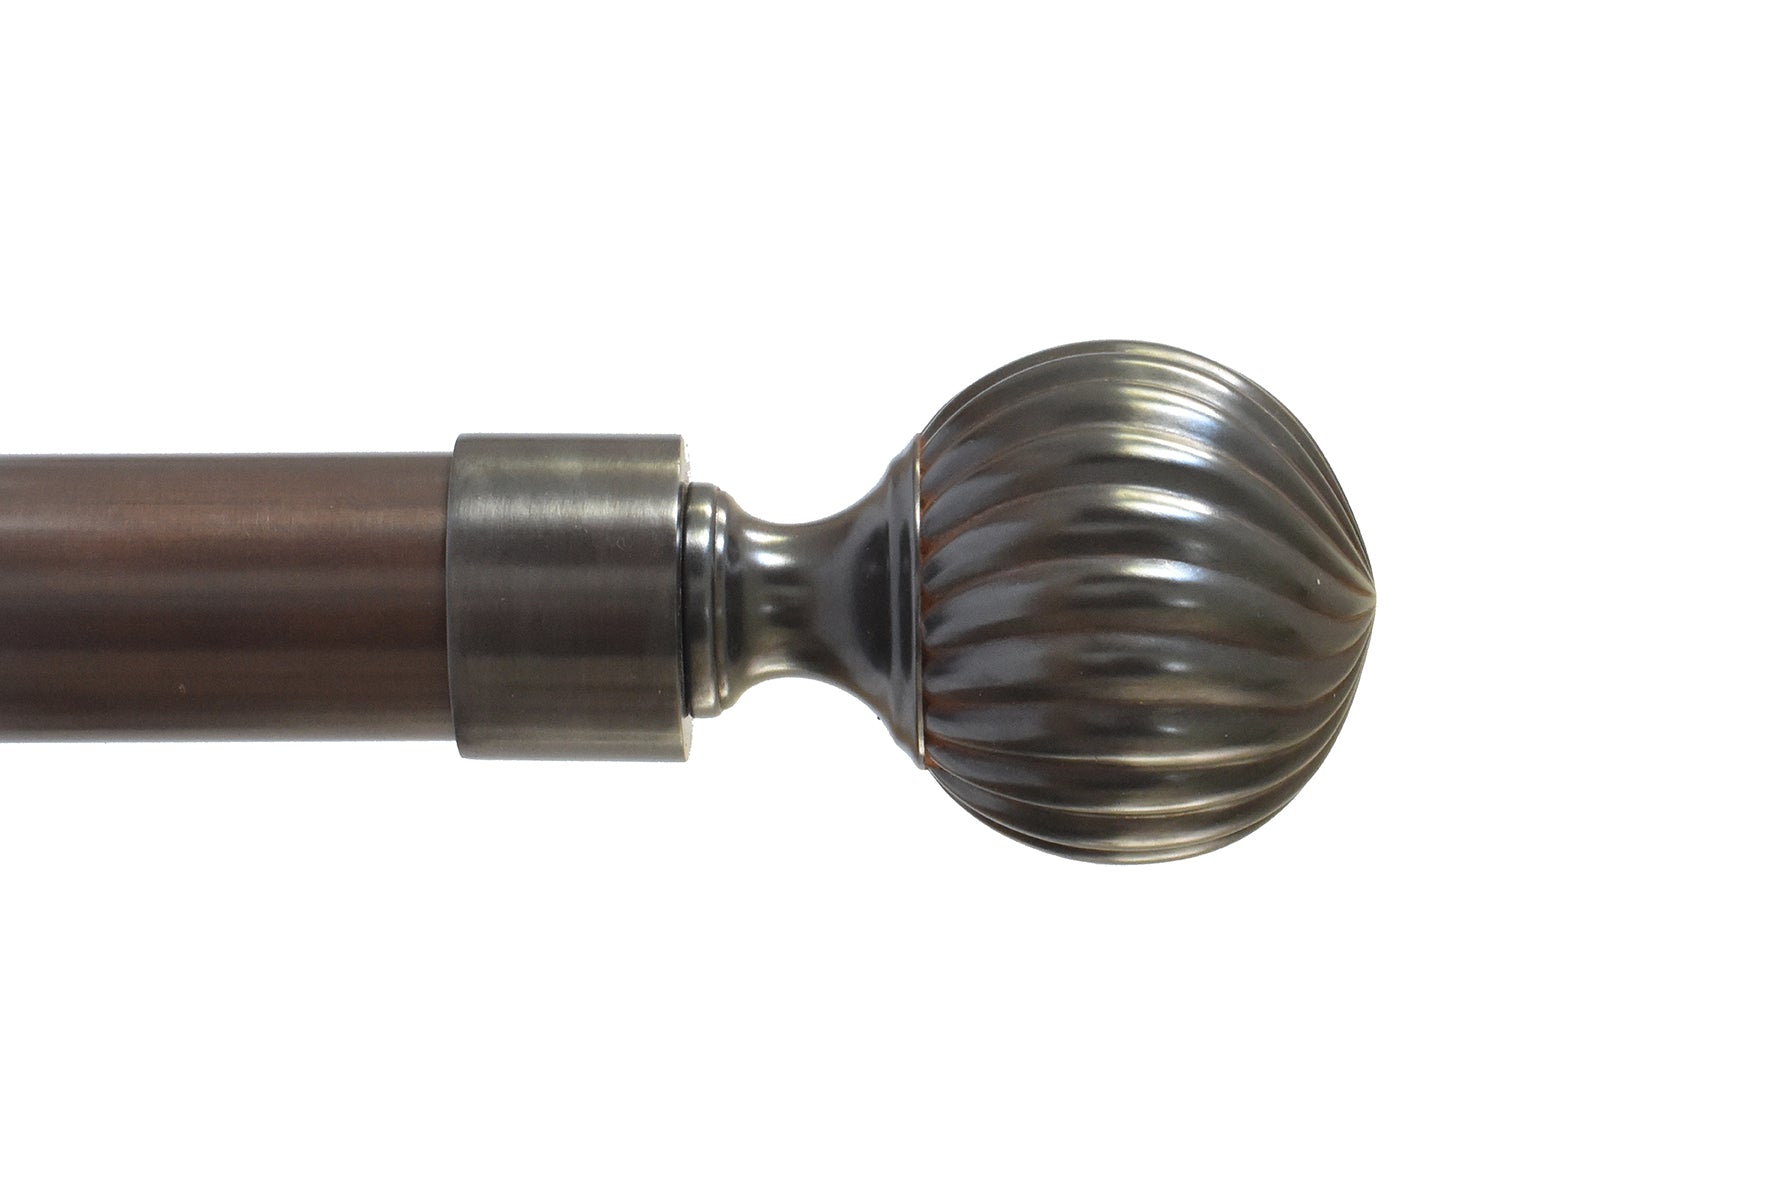 Tillys Twisted Ball Finial Curtain Pole Set in Bronze